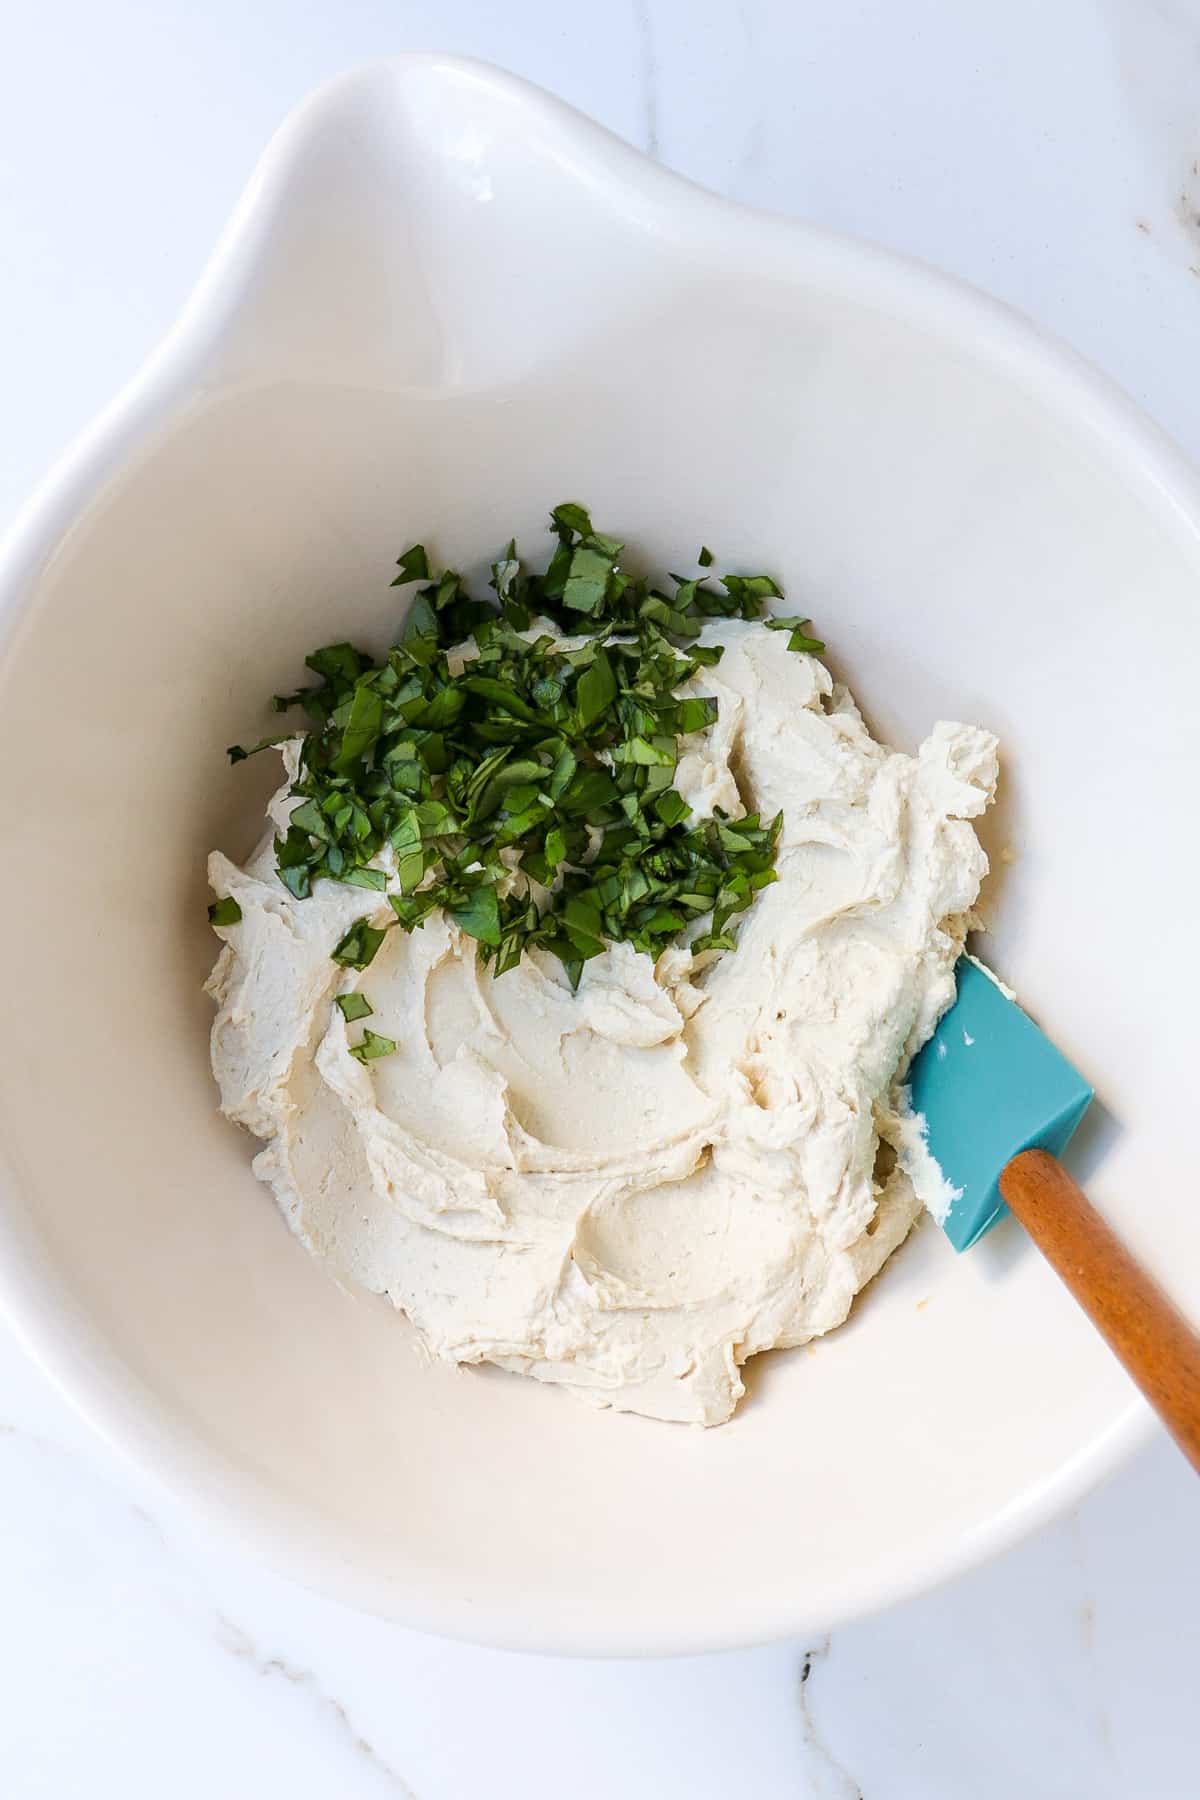 Tofu ricotta in a bowl with basil.